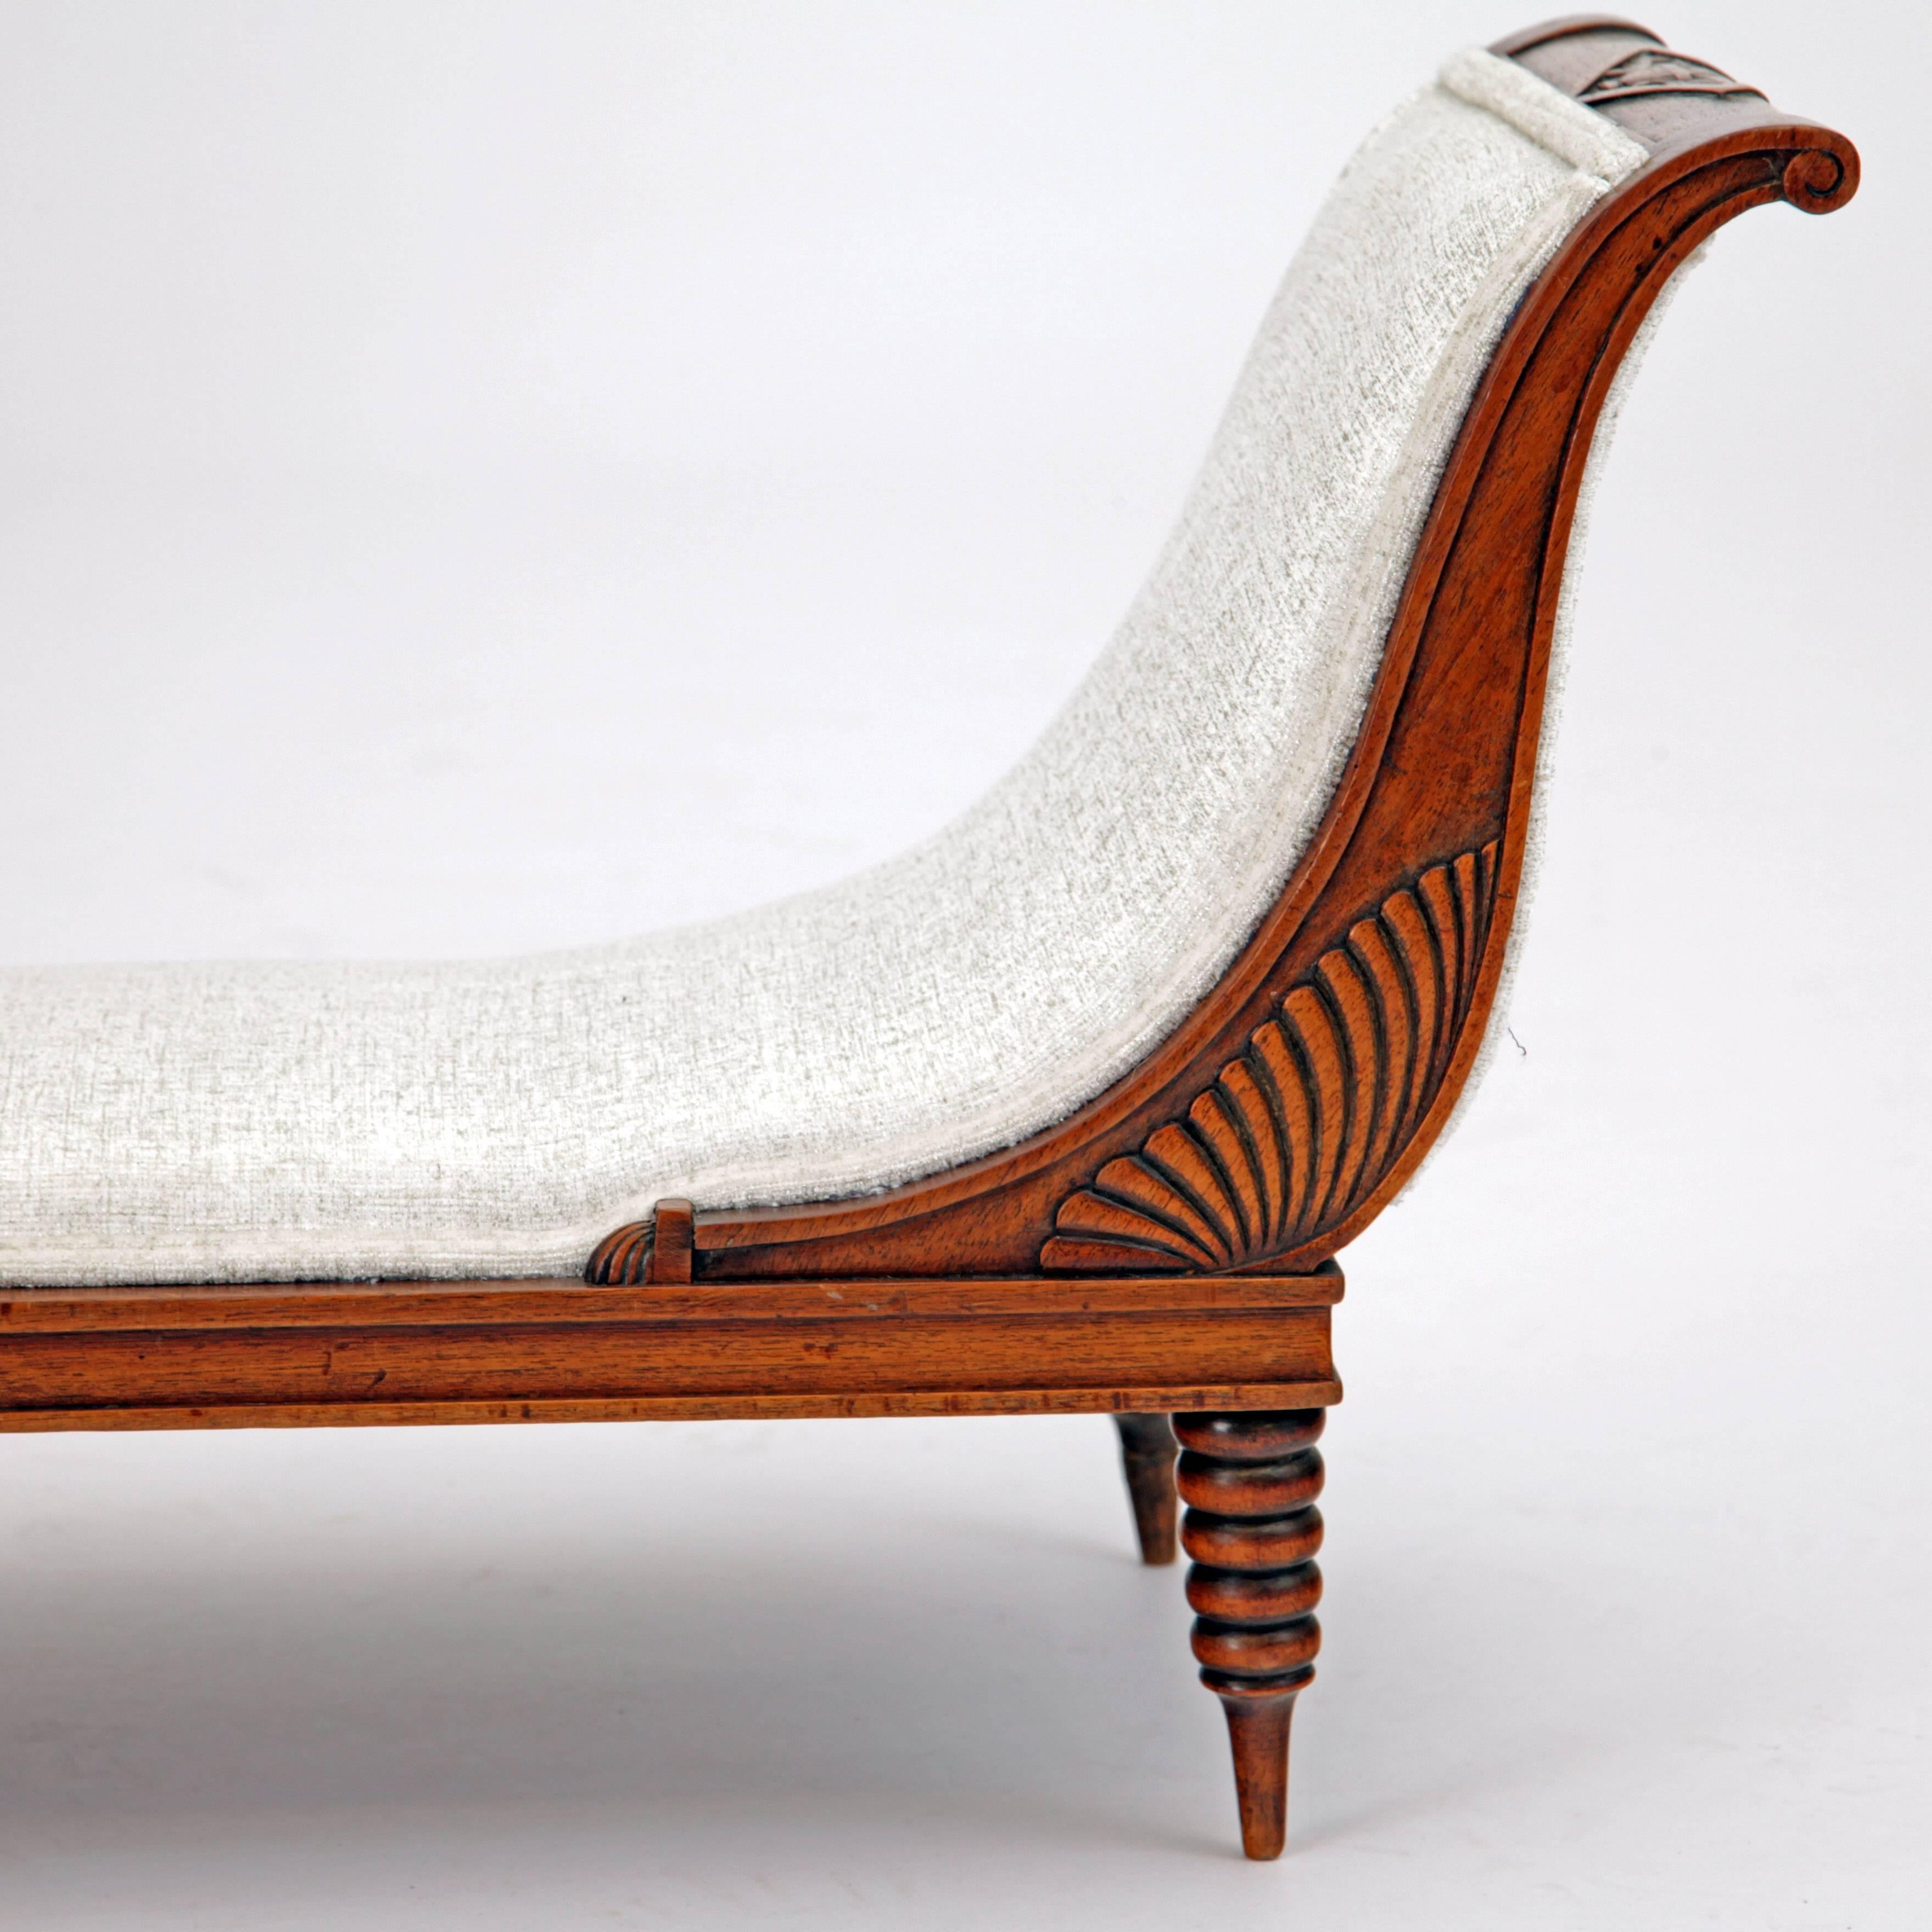 European Small Neoclassical Banquette or Foot Stool, Early 19th Century